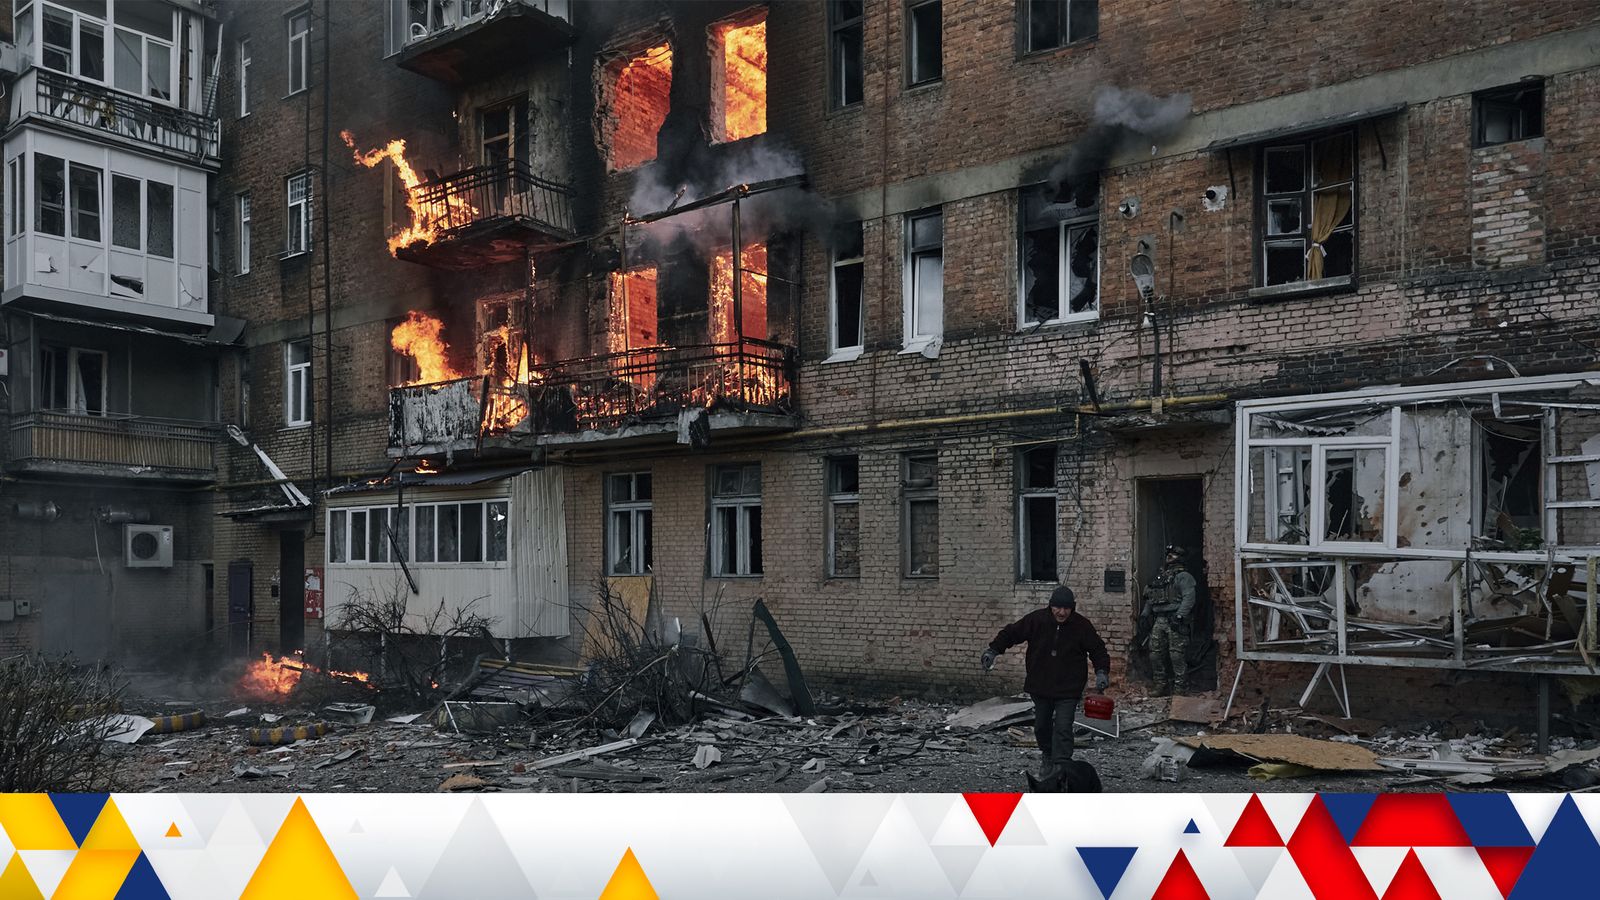 'It's terrifying to live like this': Ukrainians under relentness bombardment in one of the world's most dangerous places